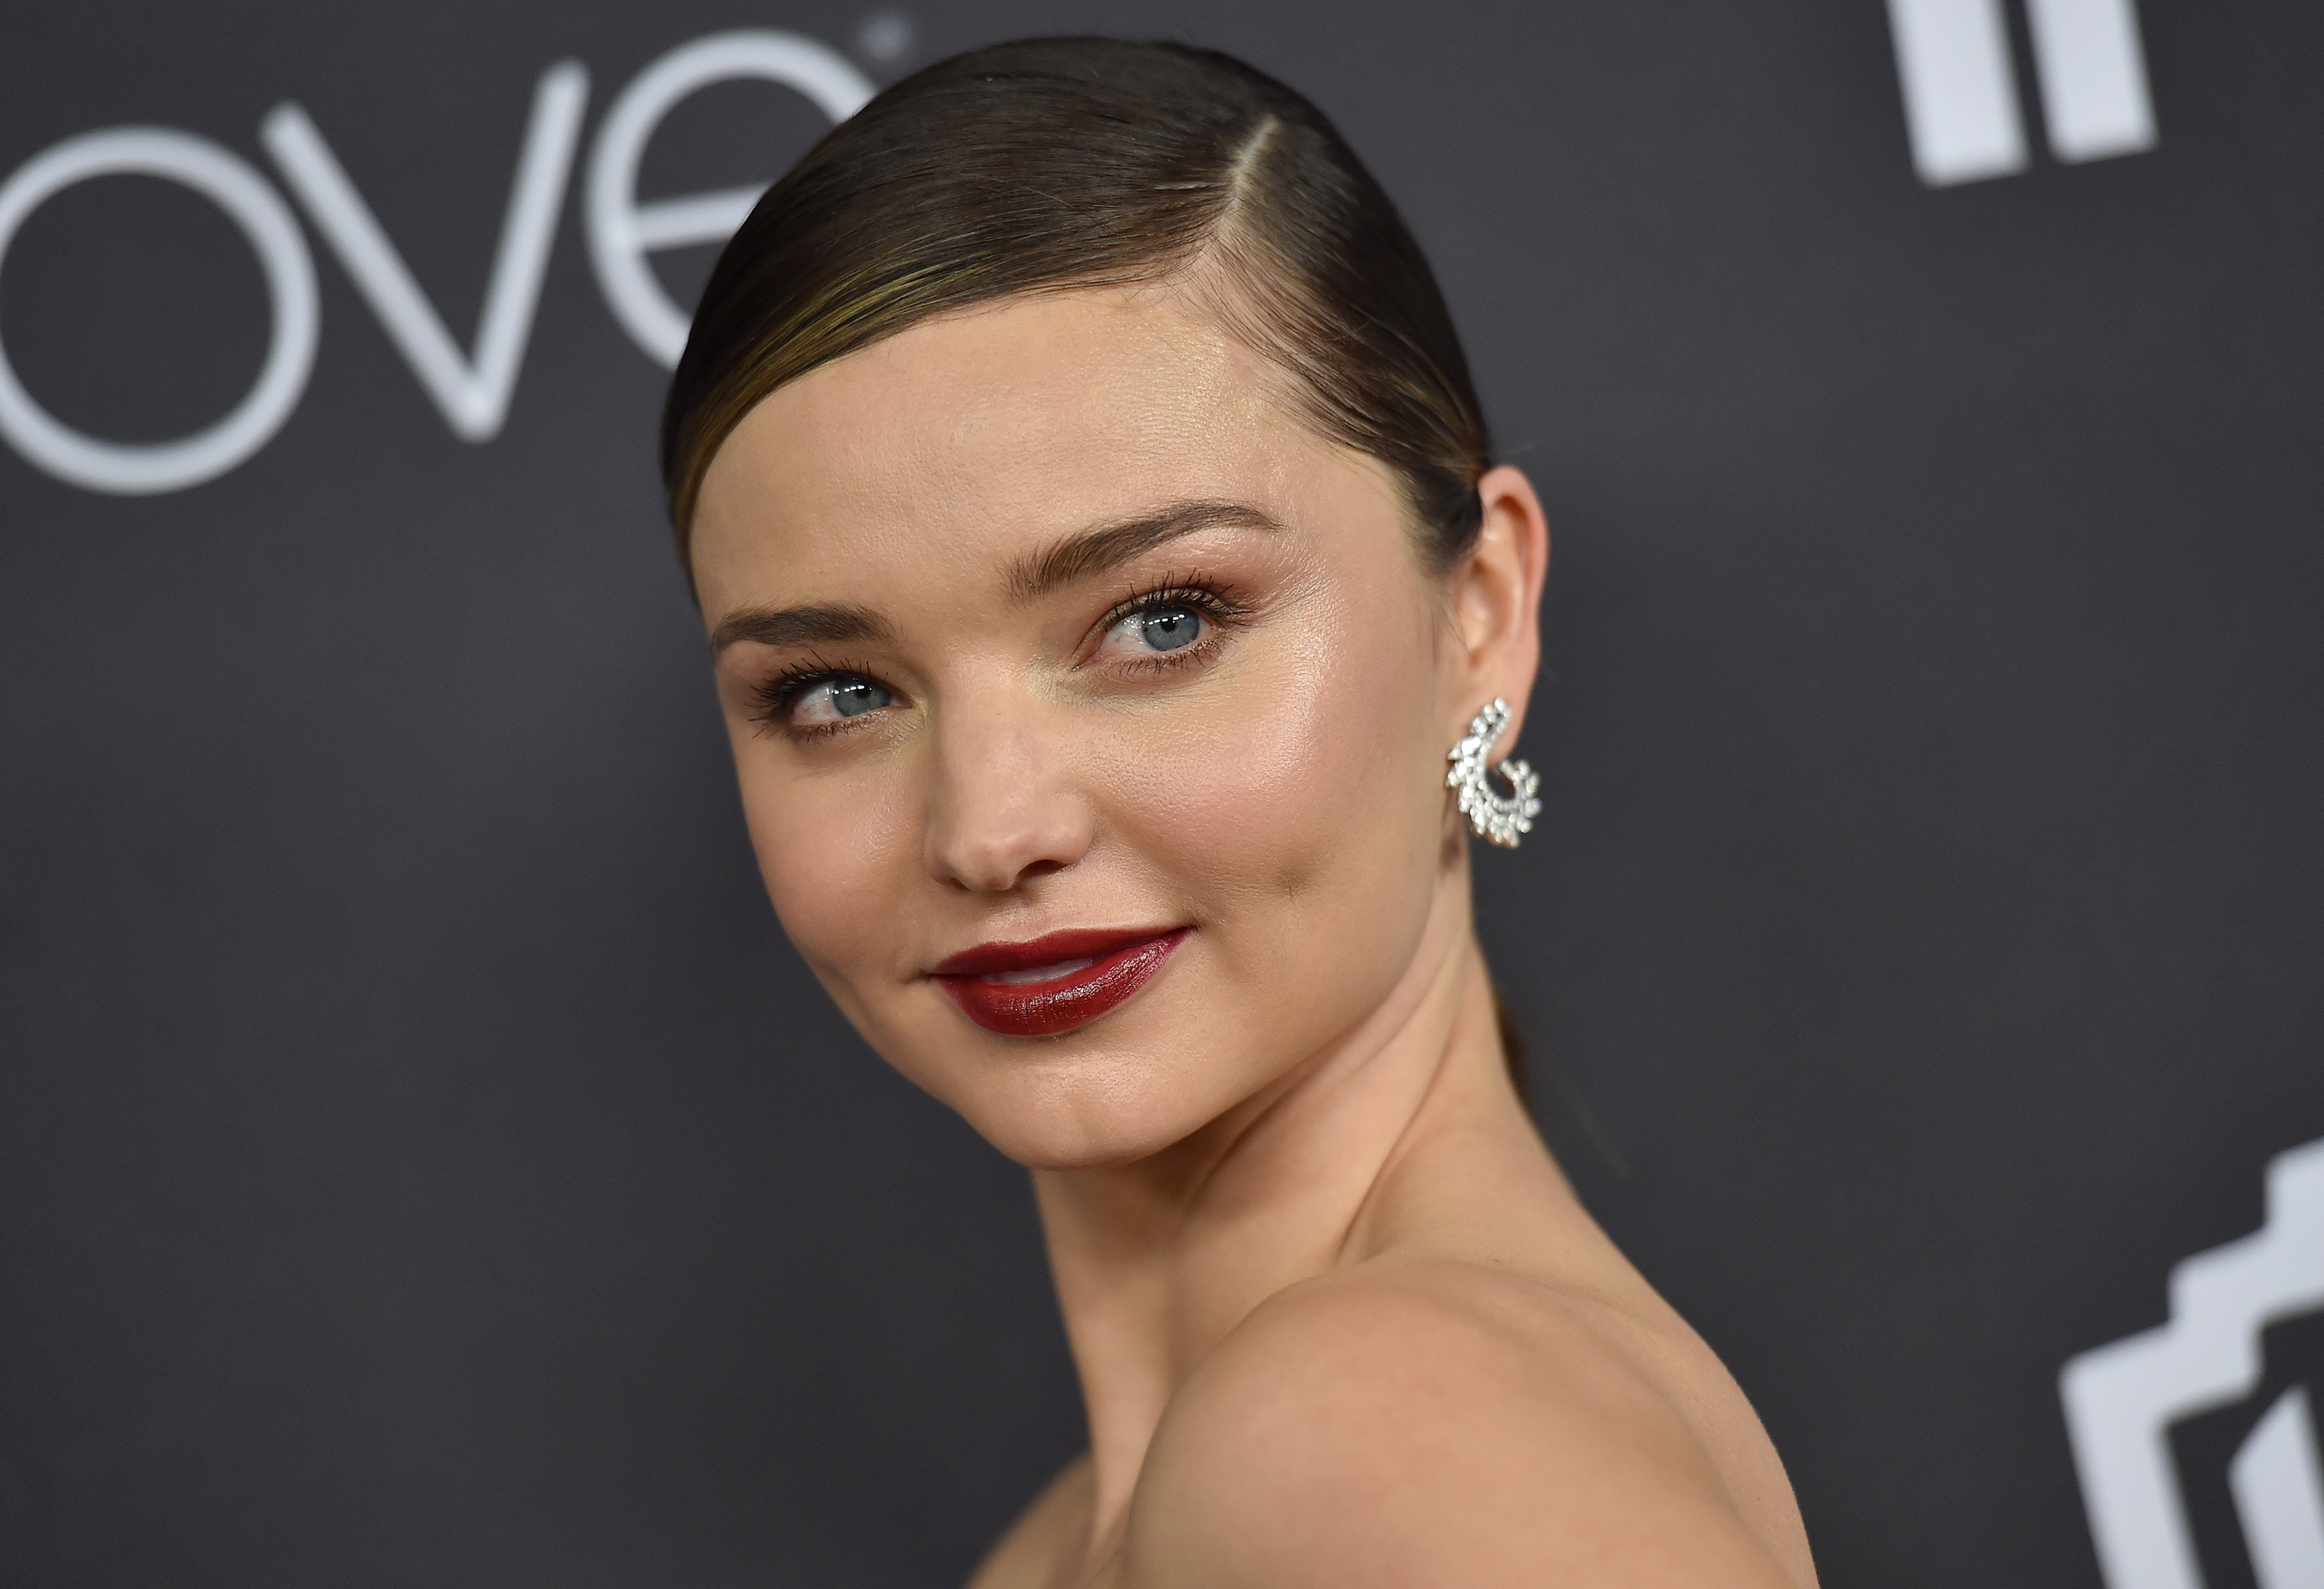 Model Miranda Kerr arrives at the 18th Annual Post-Golden Globes Party hosted by Warner Bros. Pictures and InStyle at The Beverly Hilton Hotel on January 8, 2017 in Beverly Hills, California. (Axelle/Bauer-Griffin—FilmMagic)